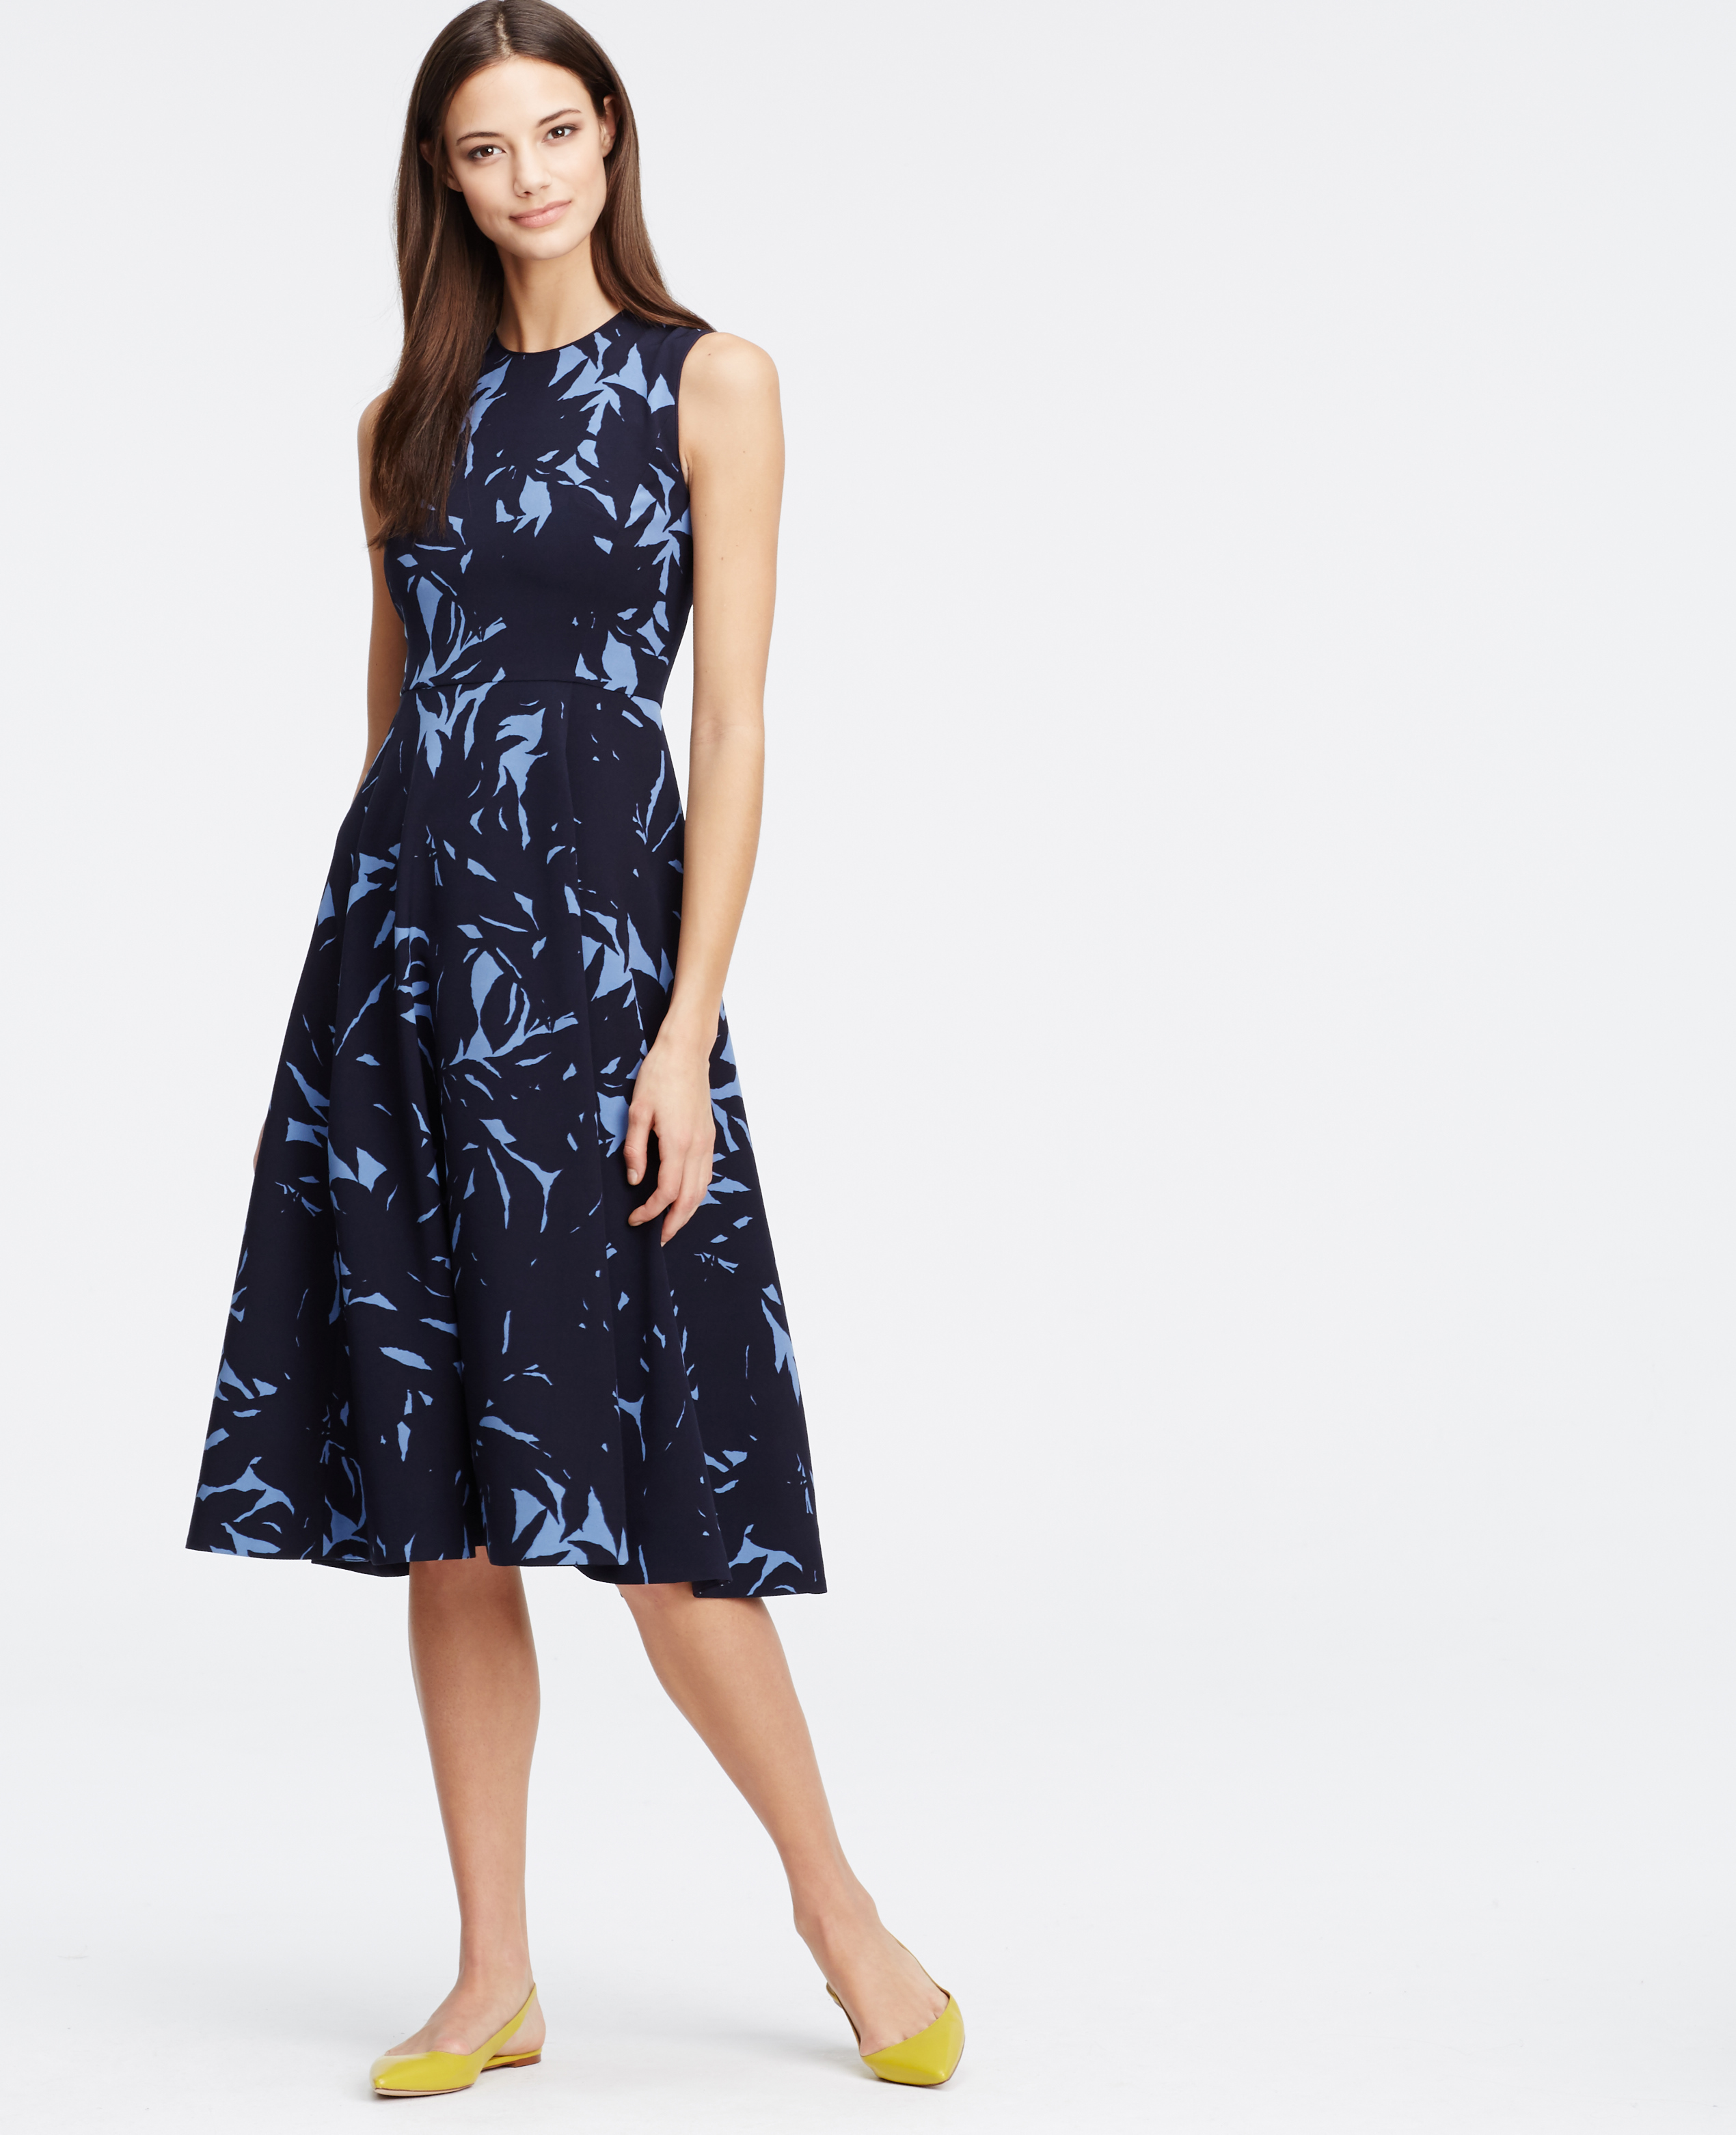 lord and taylor petite cocktail dresses